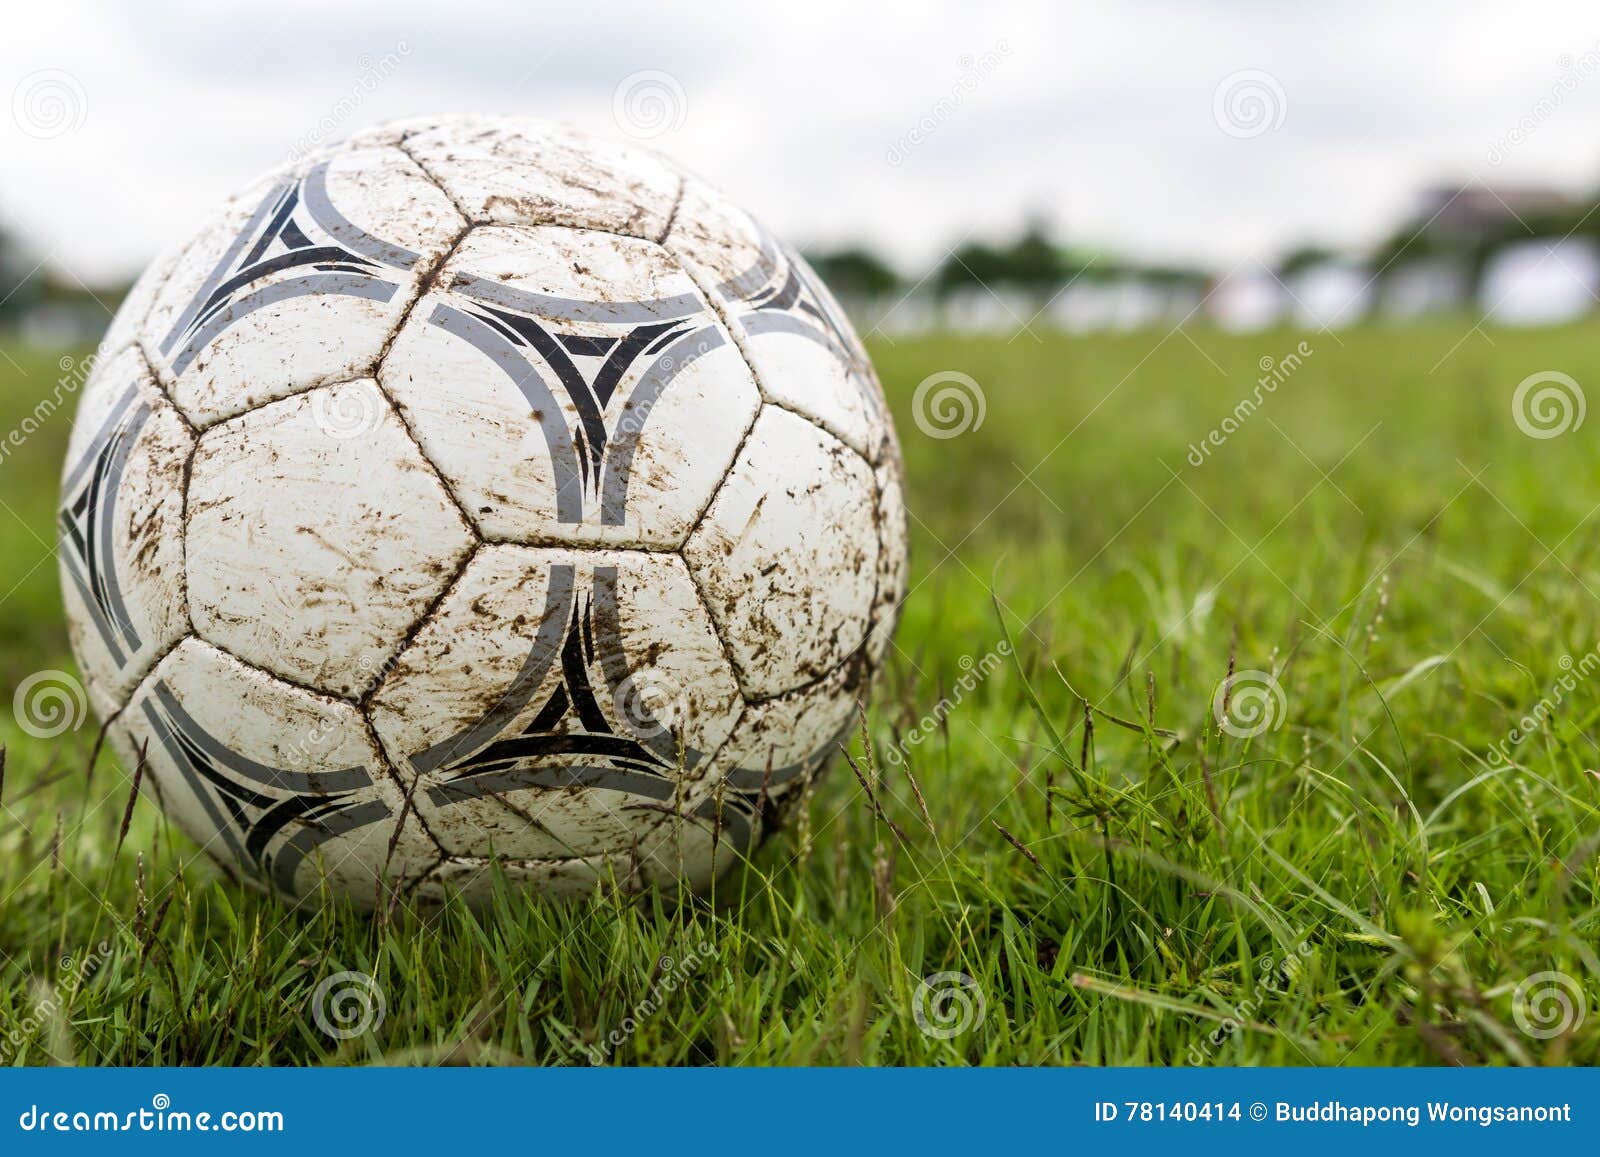 Nakhon Ratchasima Thailand October 1 Muddy Soccer Ball On A Football Field In Municipal Stadium Nakhon Ratchasima On October Stock Photo Image Of Nakhon Competition